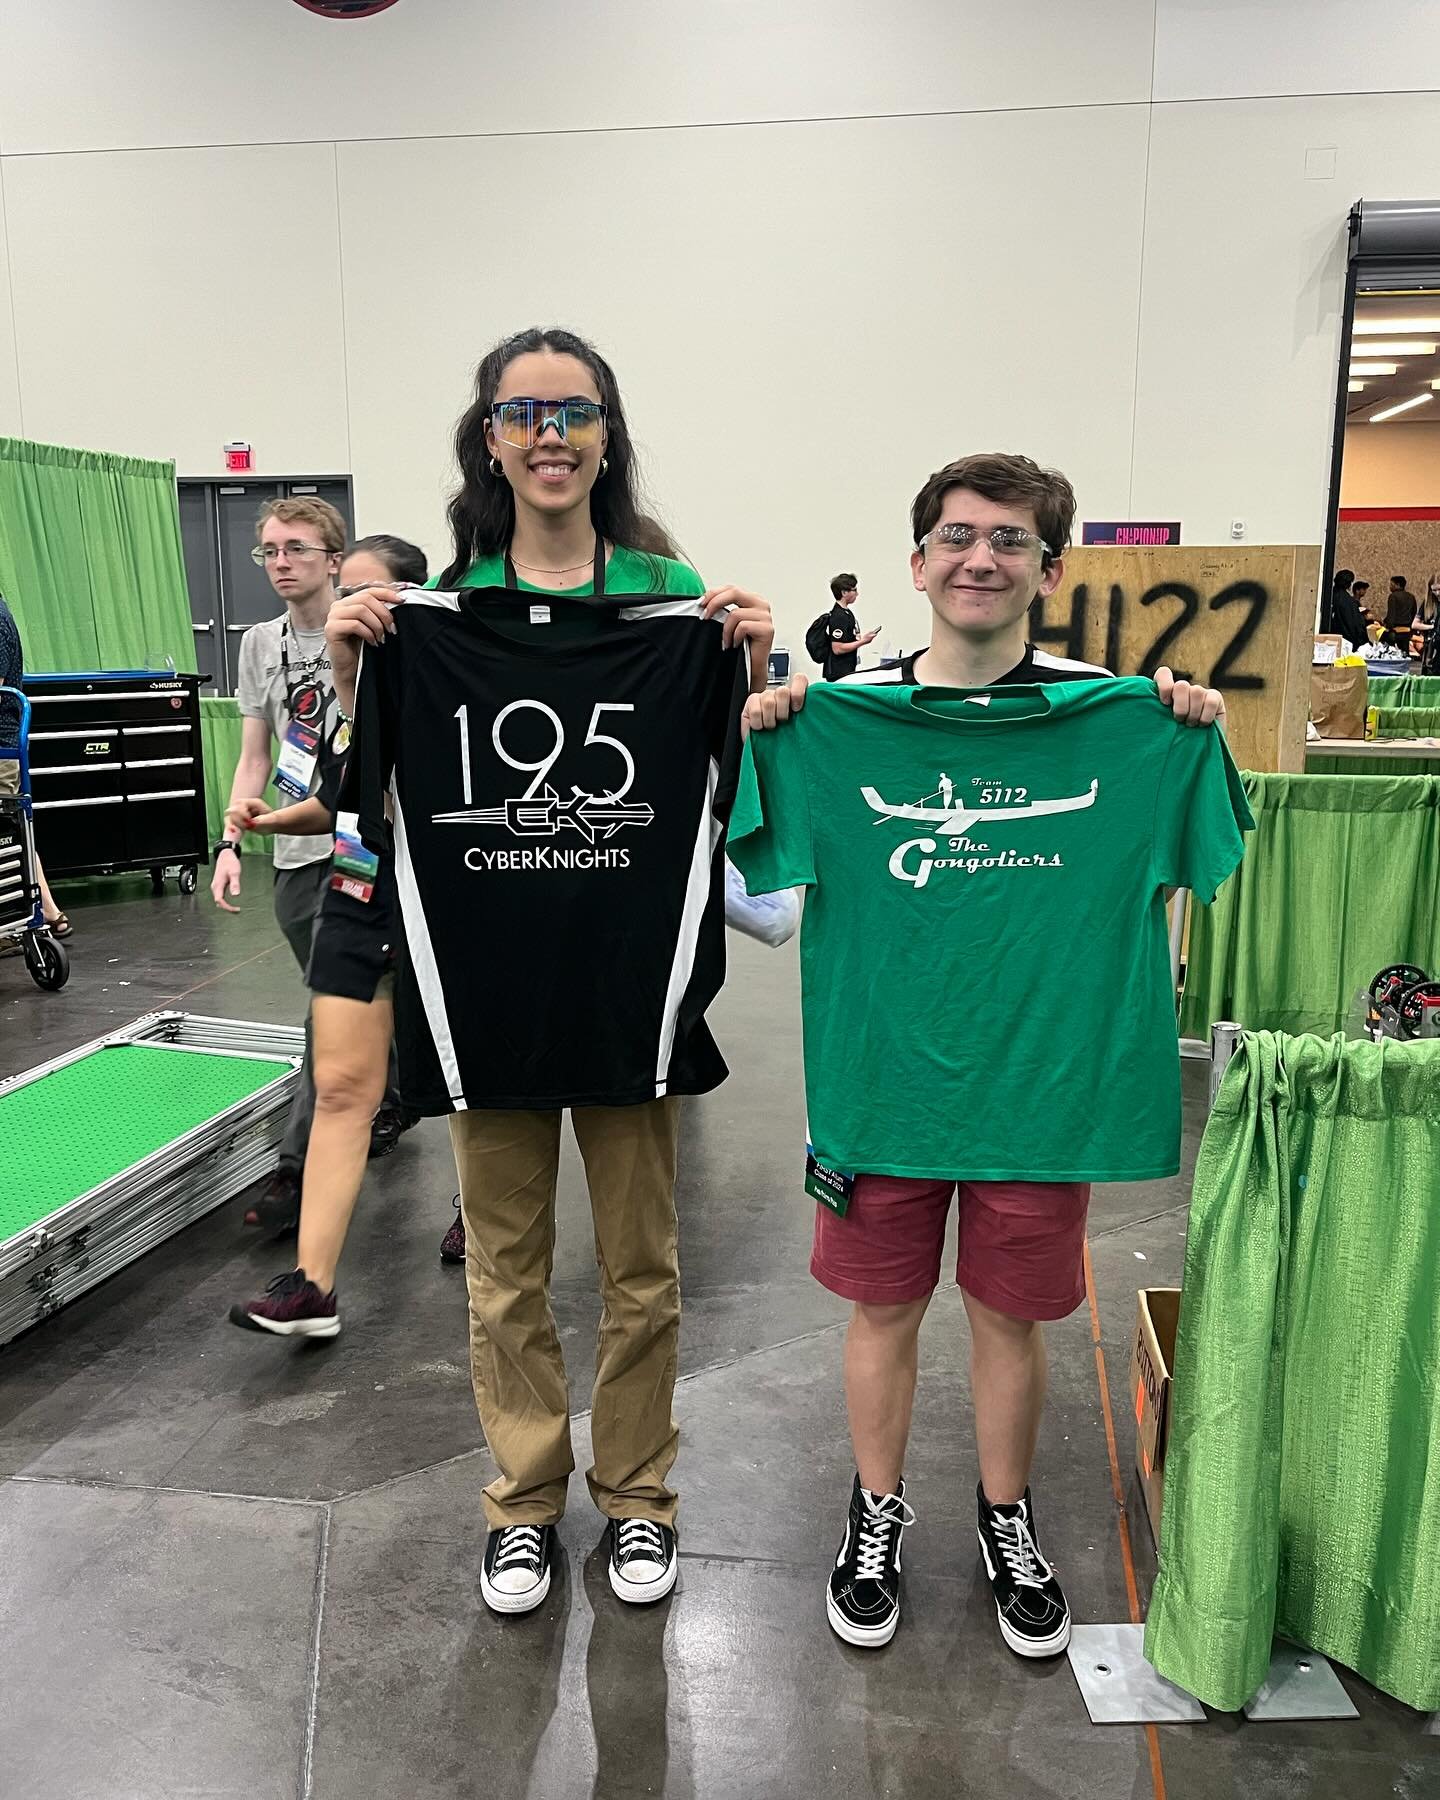 Best part of worlds is trading shirts with so many teams! Thank you to everyone we met and traded with we can&rsquo;t wait to do it again soon!!! #FRC #FIRST #TheGongoliers #Team5112 #yayrobots #robotics #omgrobots🤖